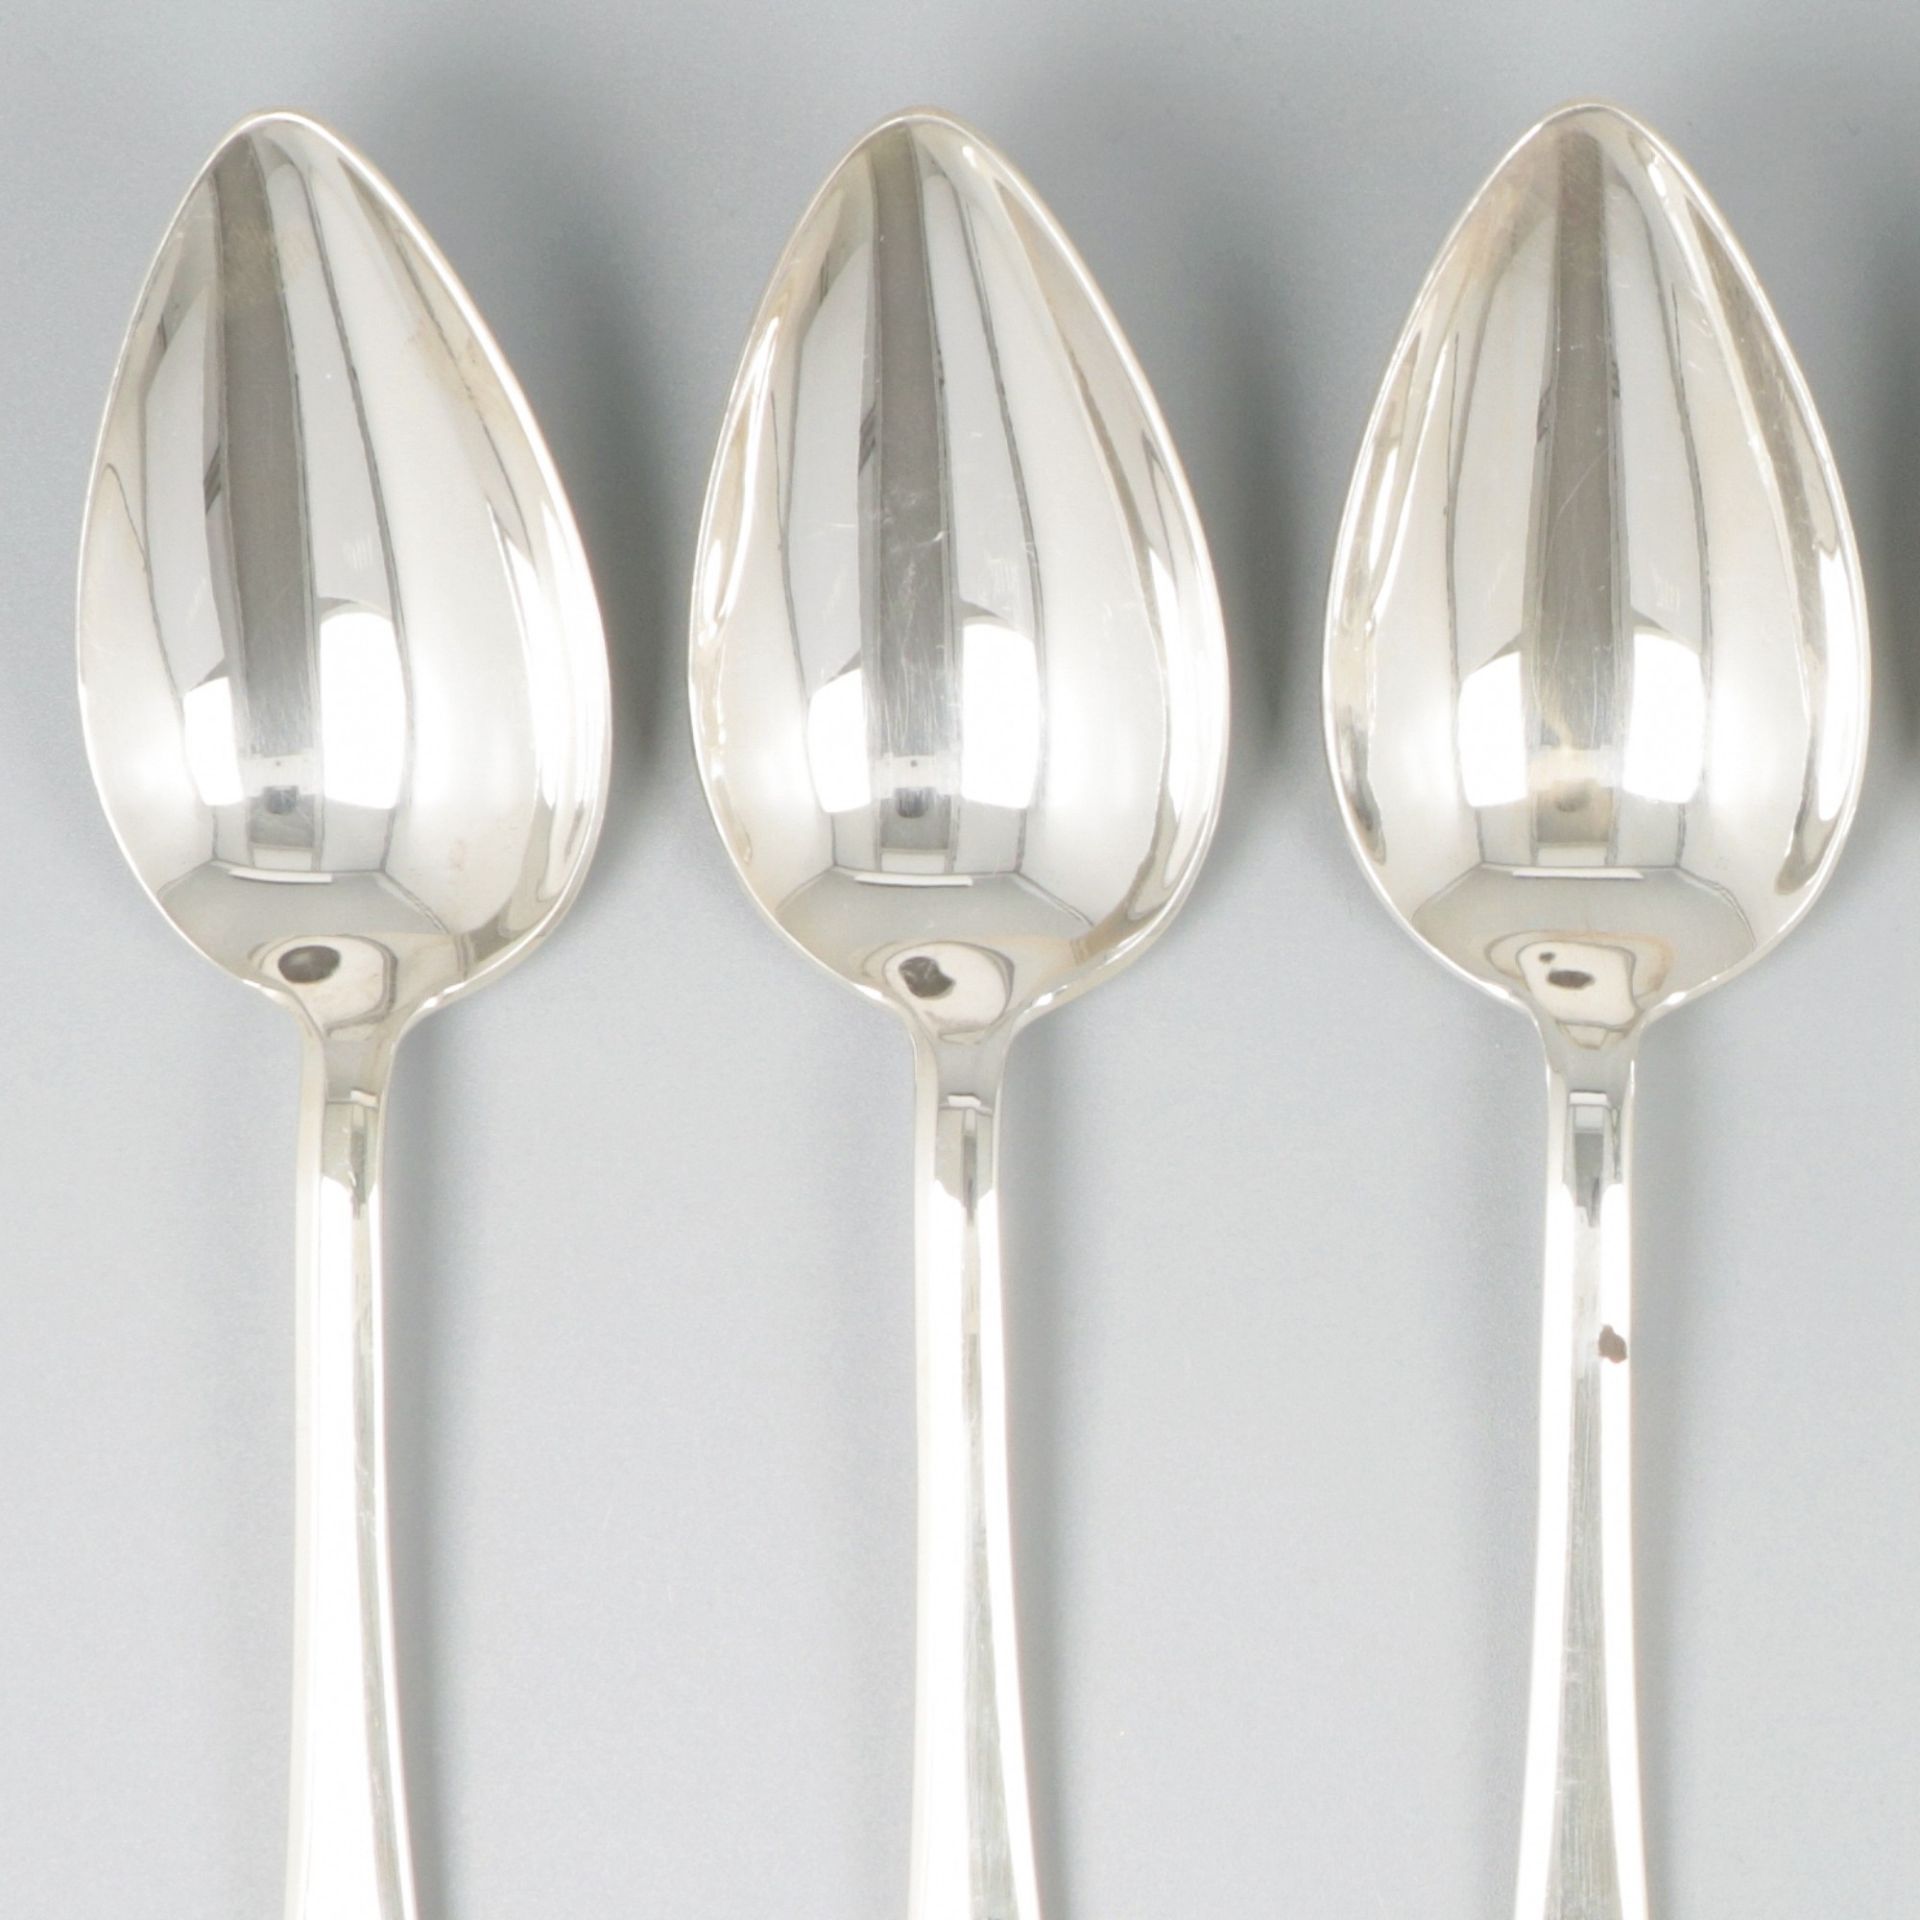 6-piece set dinner spoons "Haags Lofje" silver. - Image 3 of 5